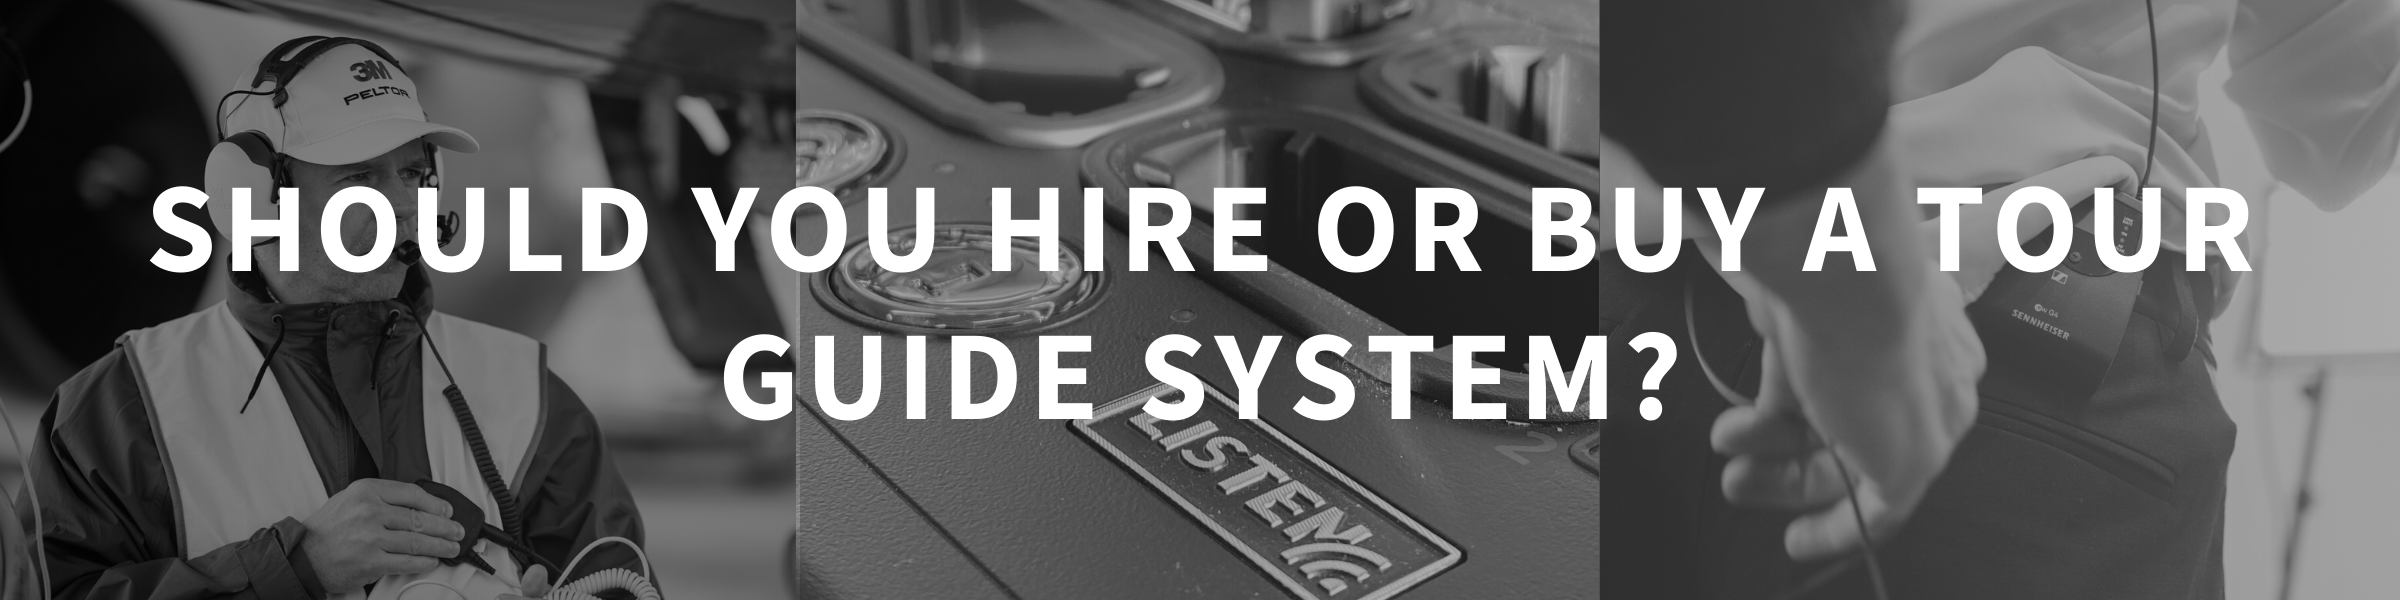 Should you hire or buy a Tour Guide System?